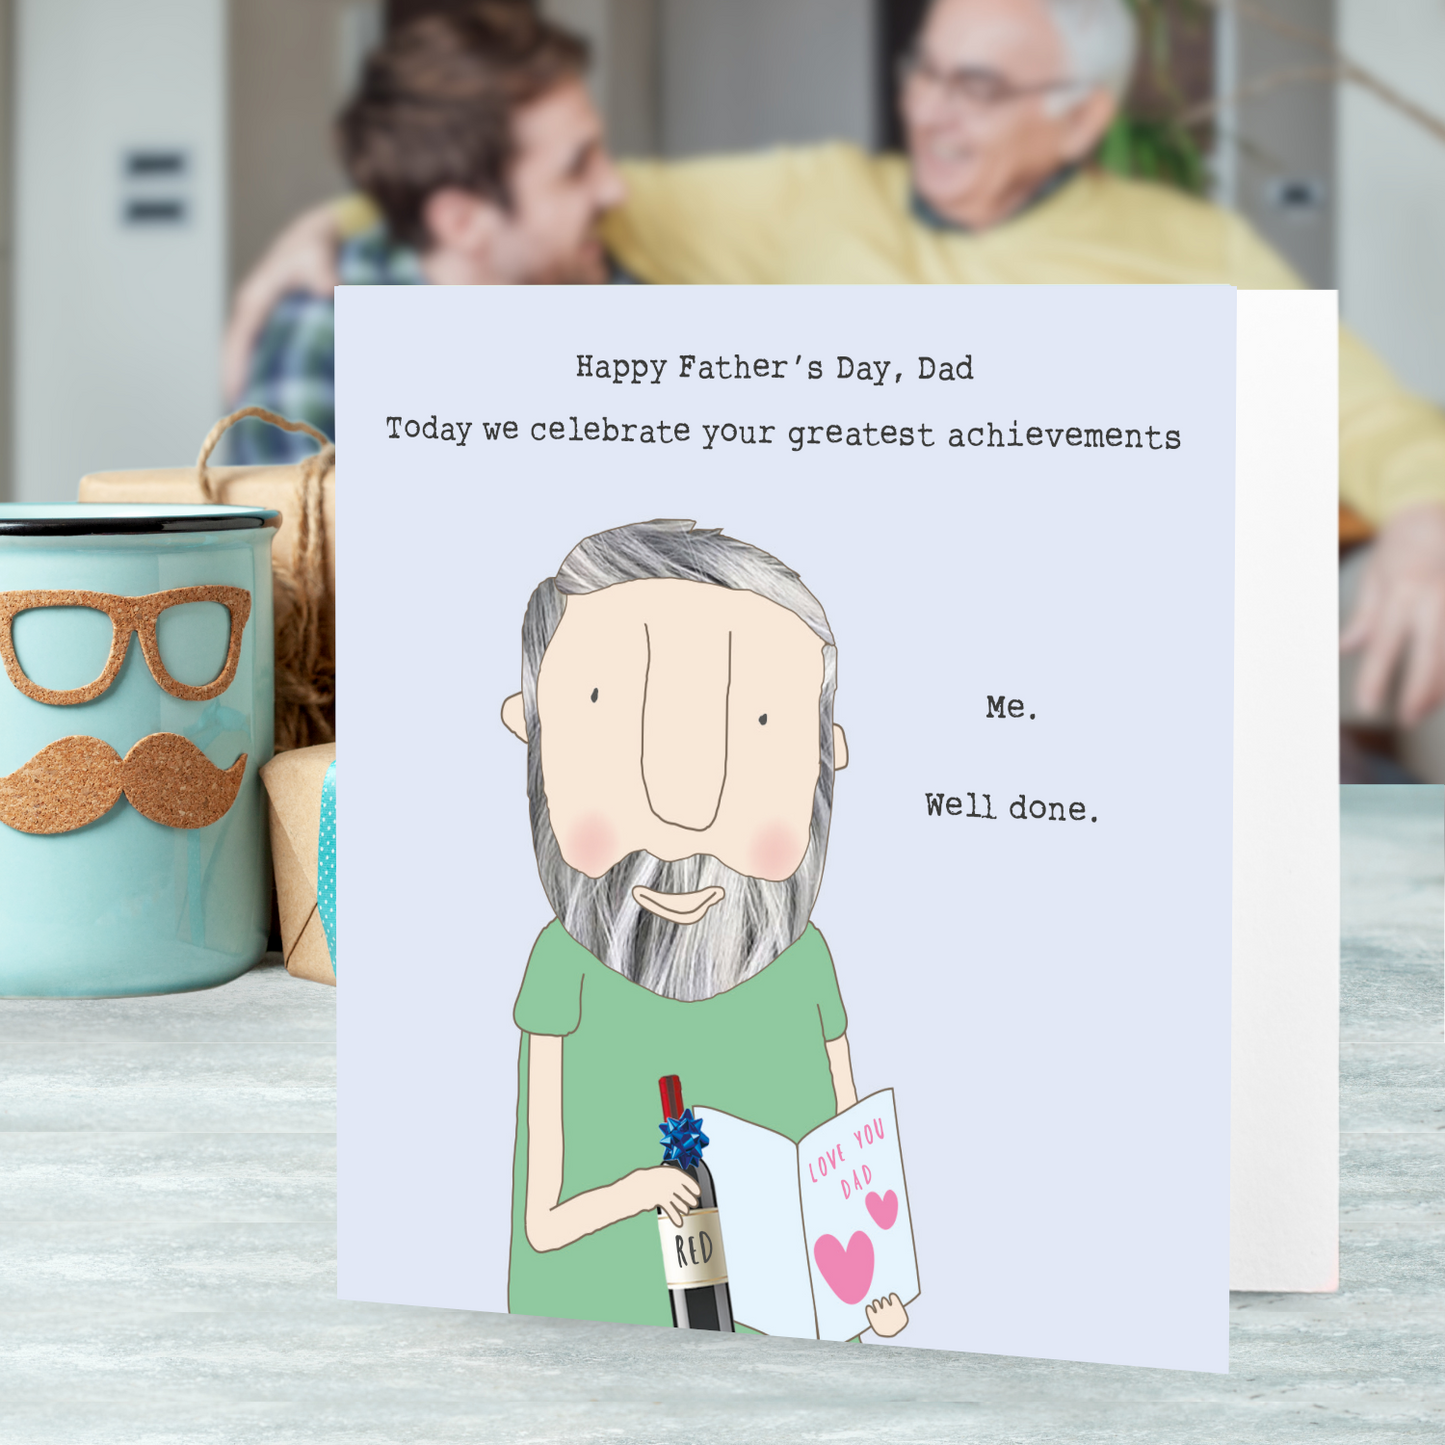 Rosie Made A Thing Well Done Dad Goals Achieved Father's Day Funny Greeting Card